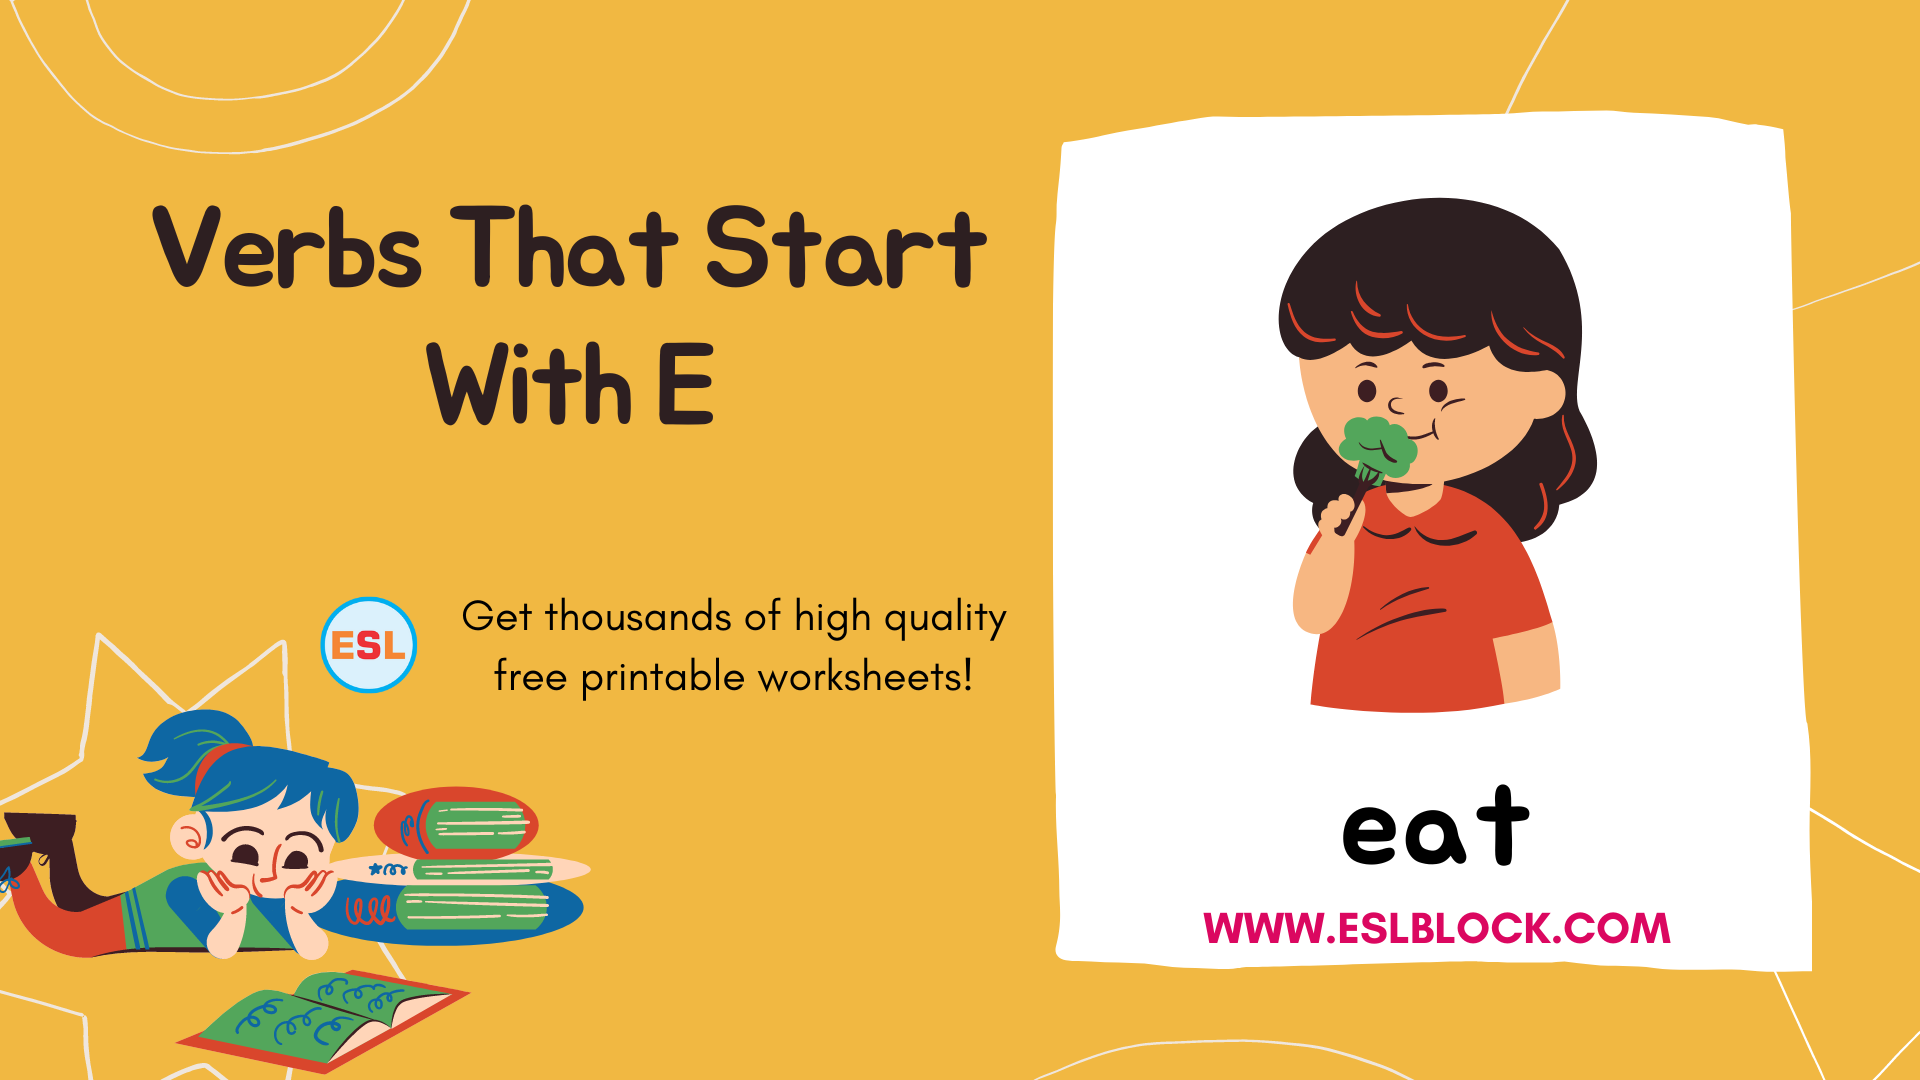 4 Letter Verbs, 5 Letter Verbs Starting With E, Action Words, Action Words That Start With E, E Action Words, E Verbs, E Verbs in English, English, English Grammar, English Vocabulary, English Words, List of Verbs That Start With E, Verbs List, Verbs That Start With E, Vocabulary, Words That Start With E